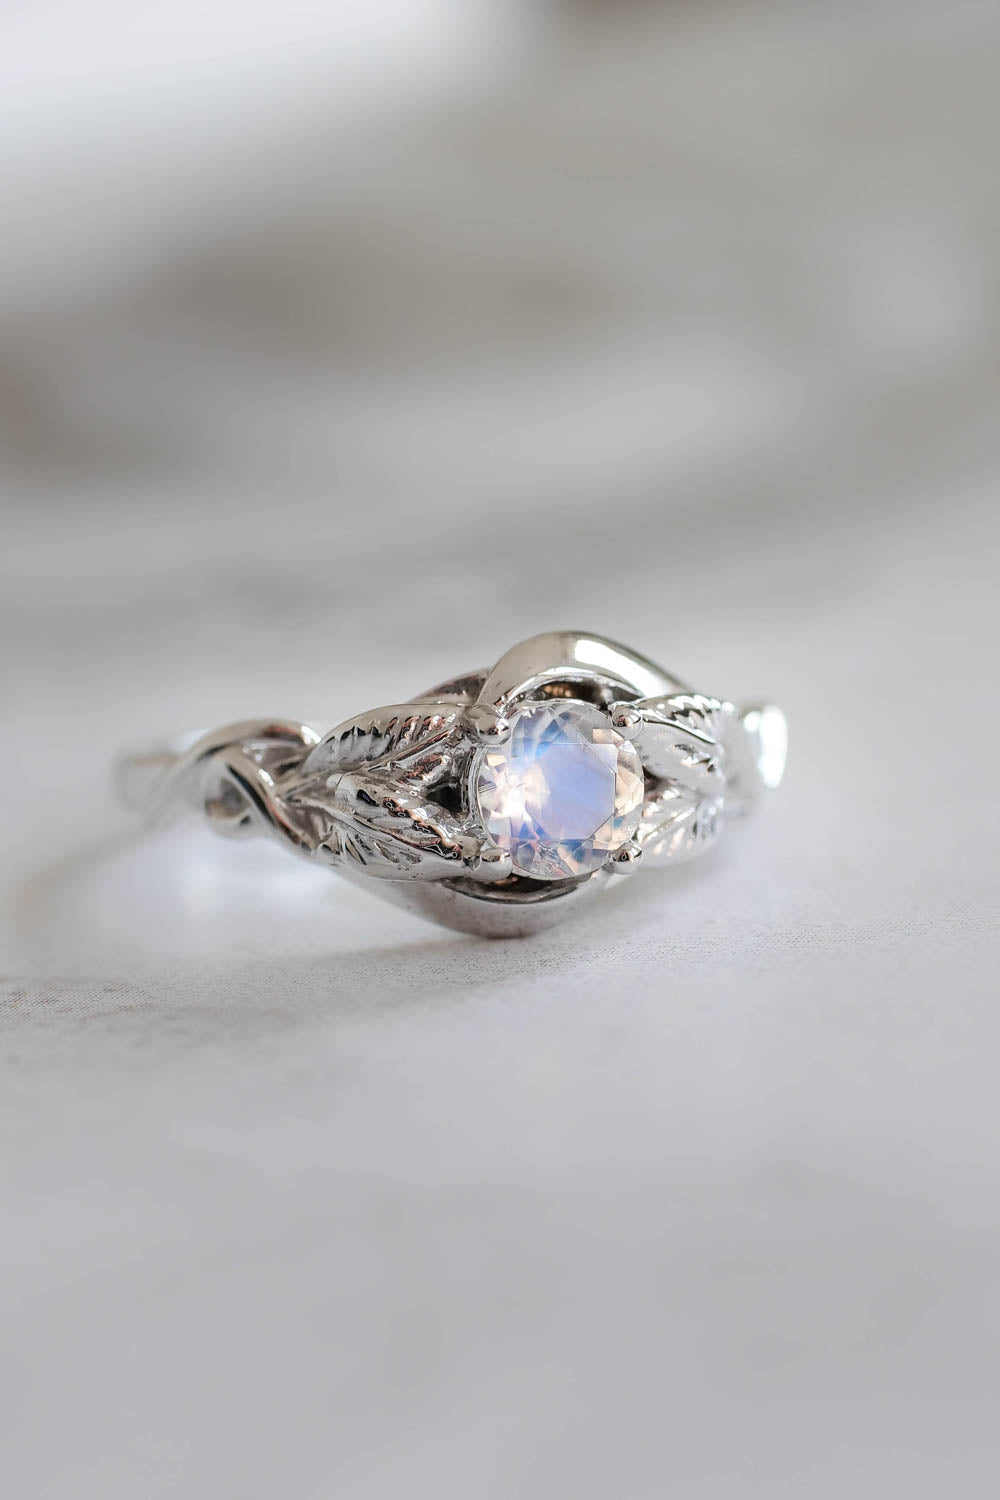 Woman engagement ring with moonstone in white gold / Azalea - Eden Garden Jewelry™